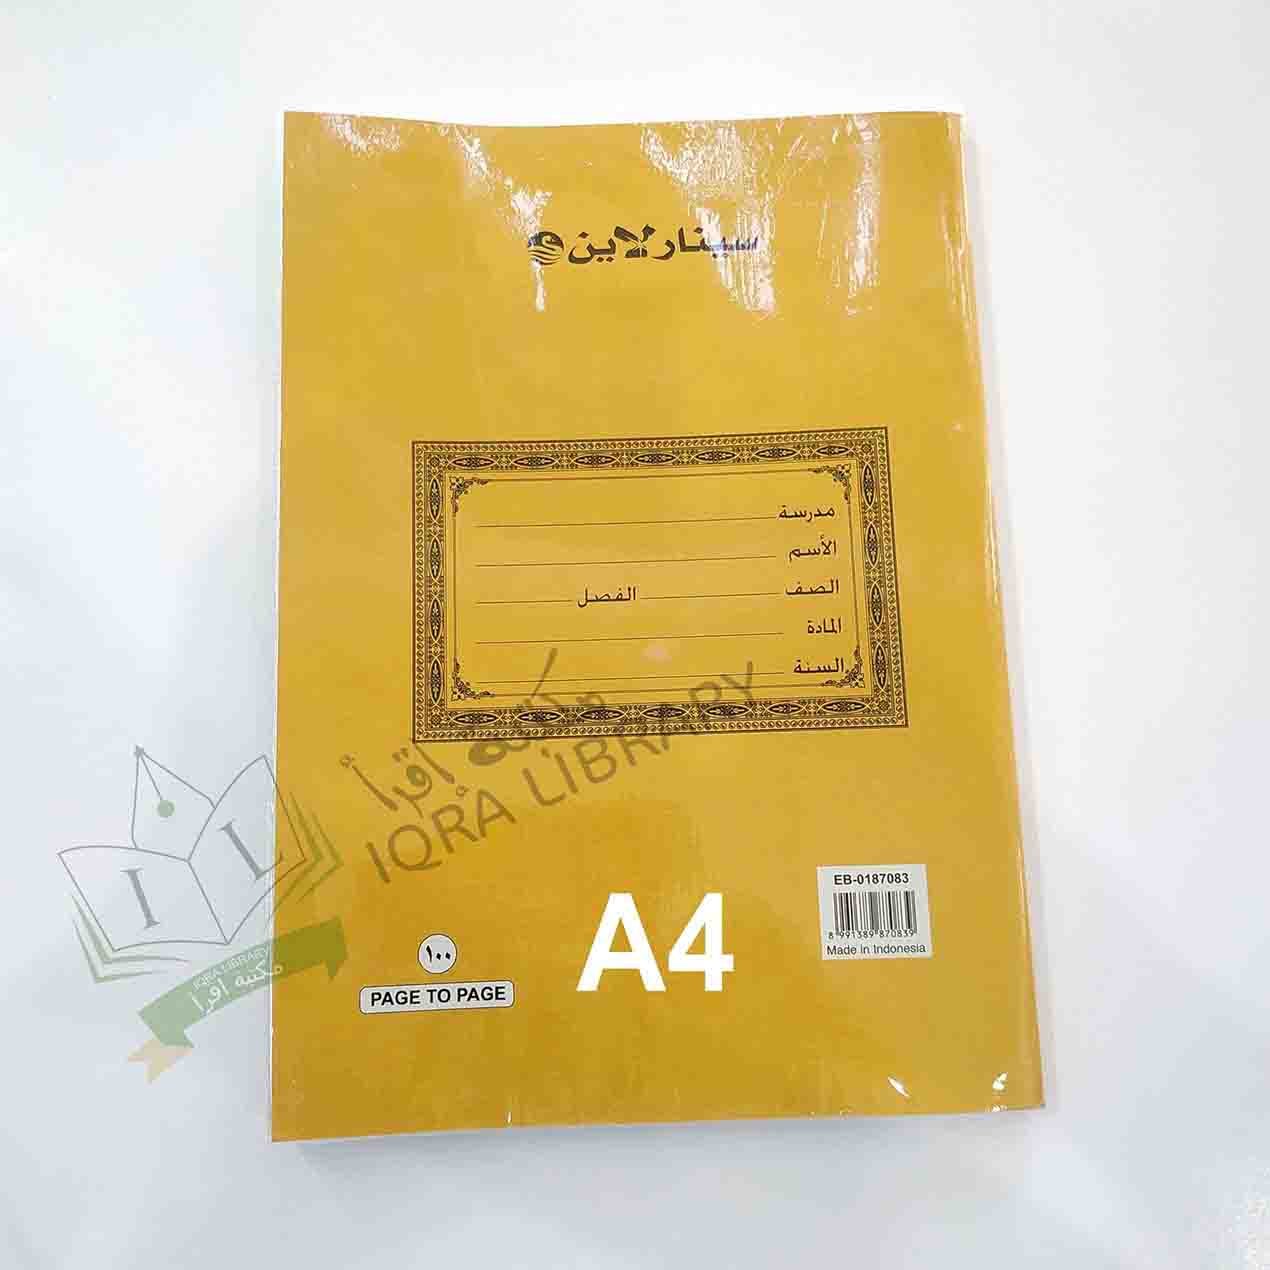 PAGE TO PAGE A4 100 SHEETS-EB-01818 SINARLINE – Iqra Library Qatar